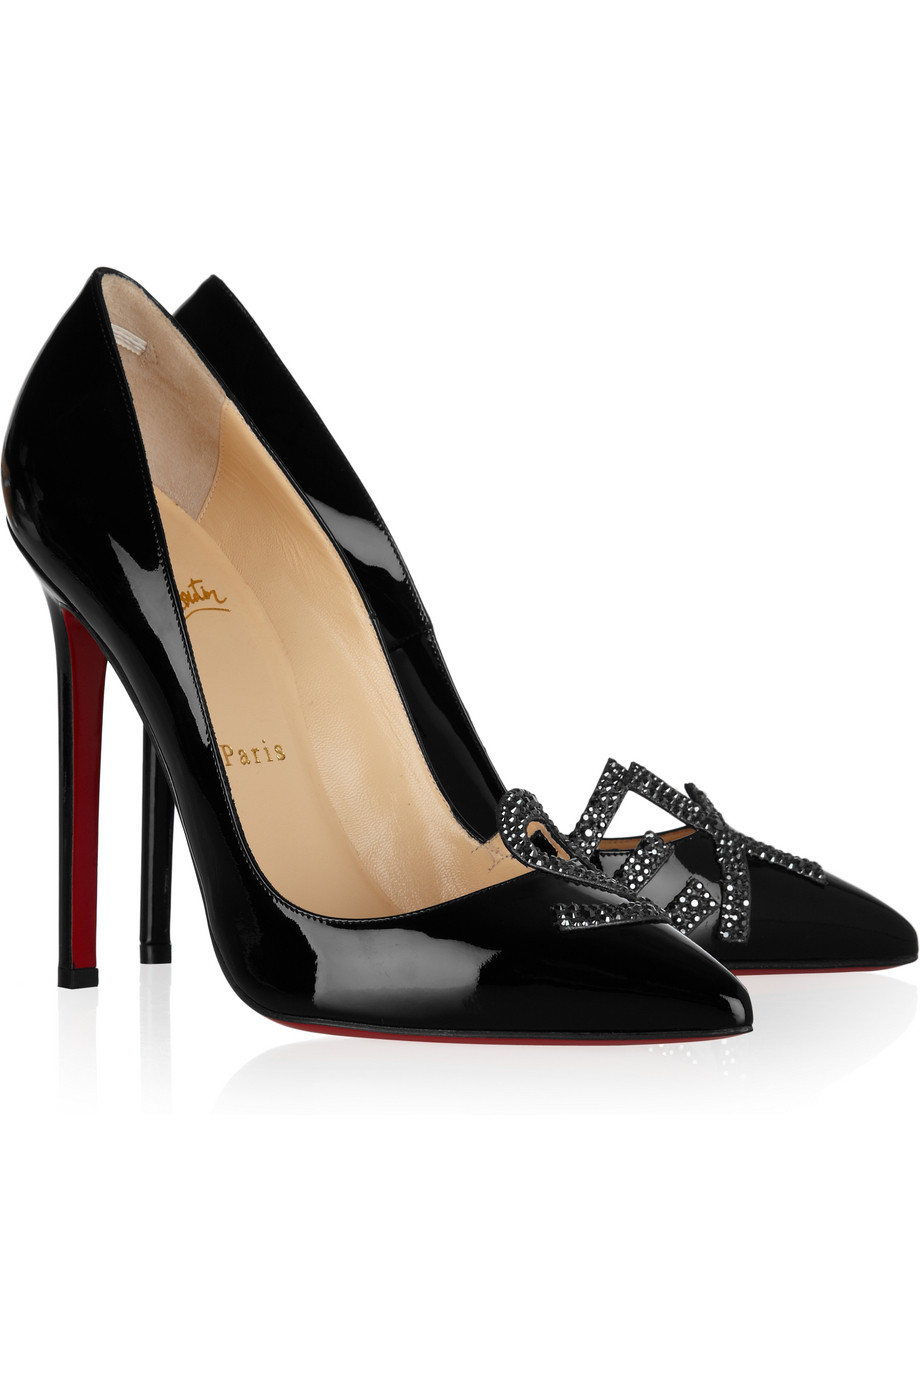 christian louboutin pigalle 120 crystal embellished suede pumps